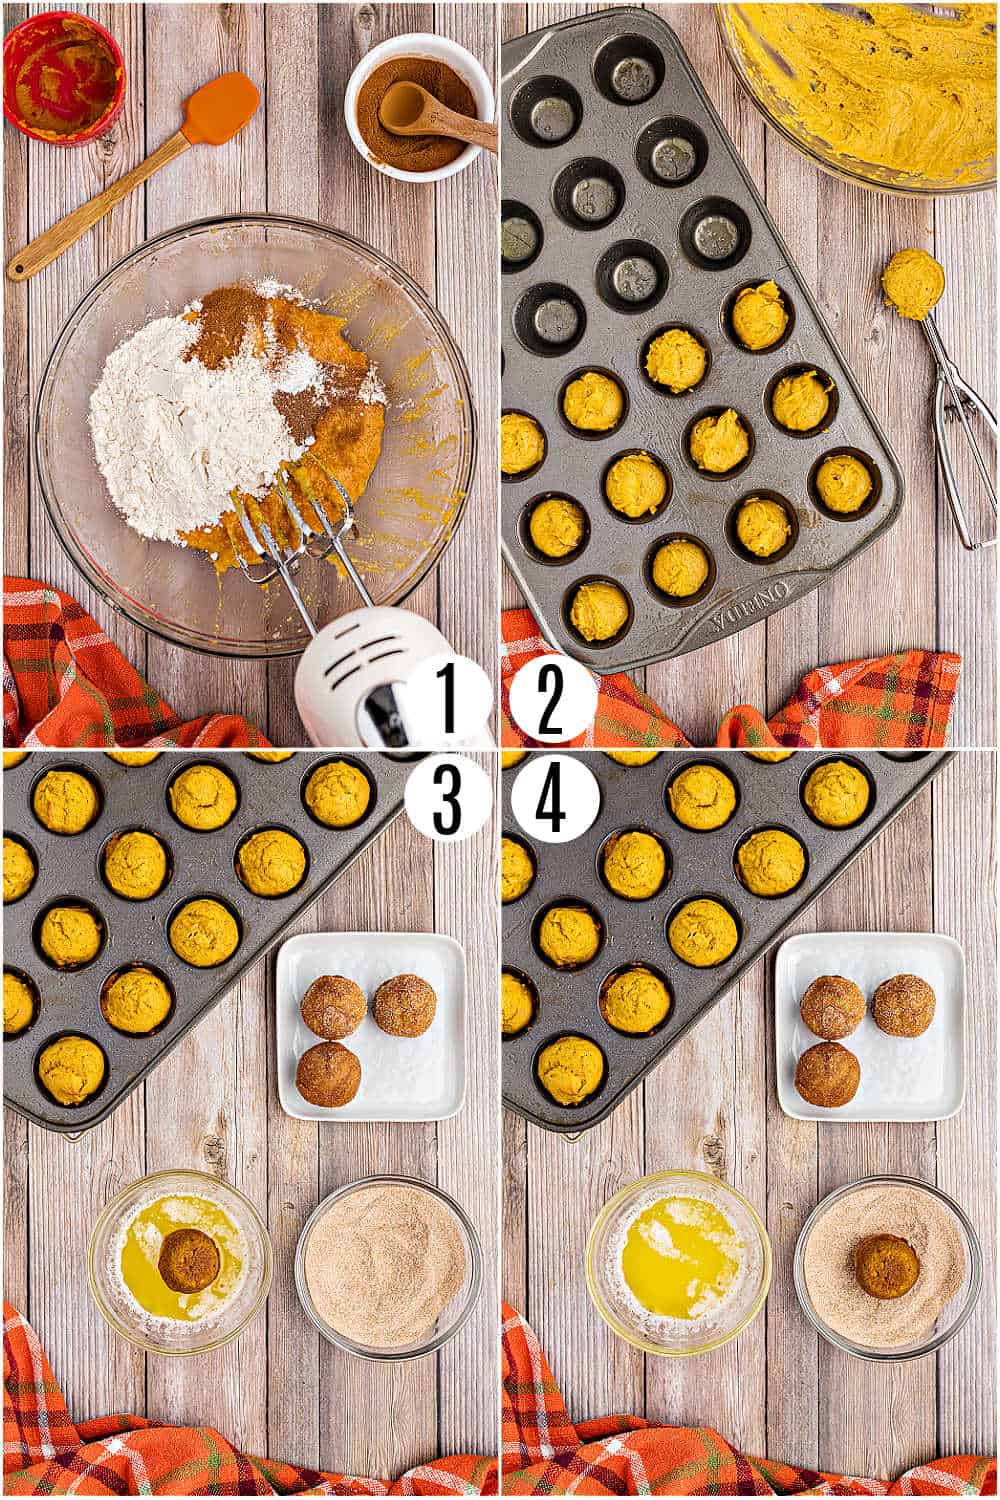 Step by step photos showing how to make pumpkin donut holes.